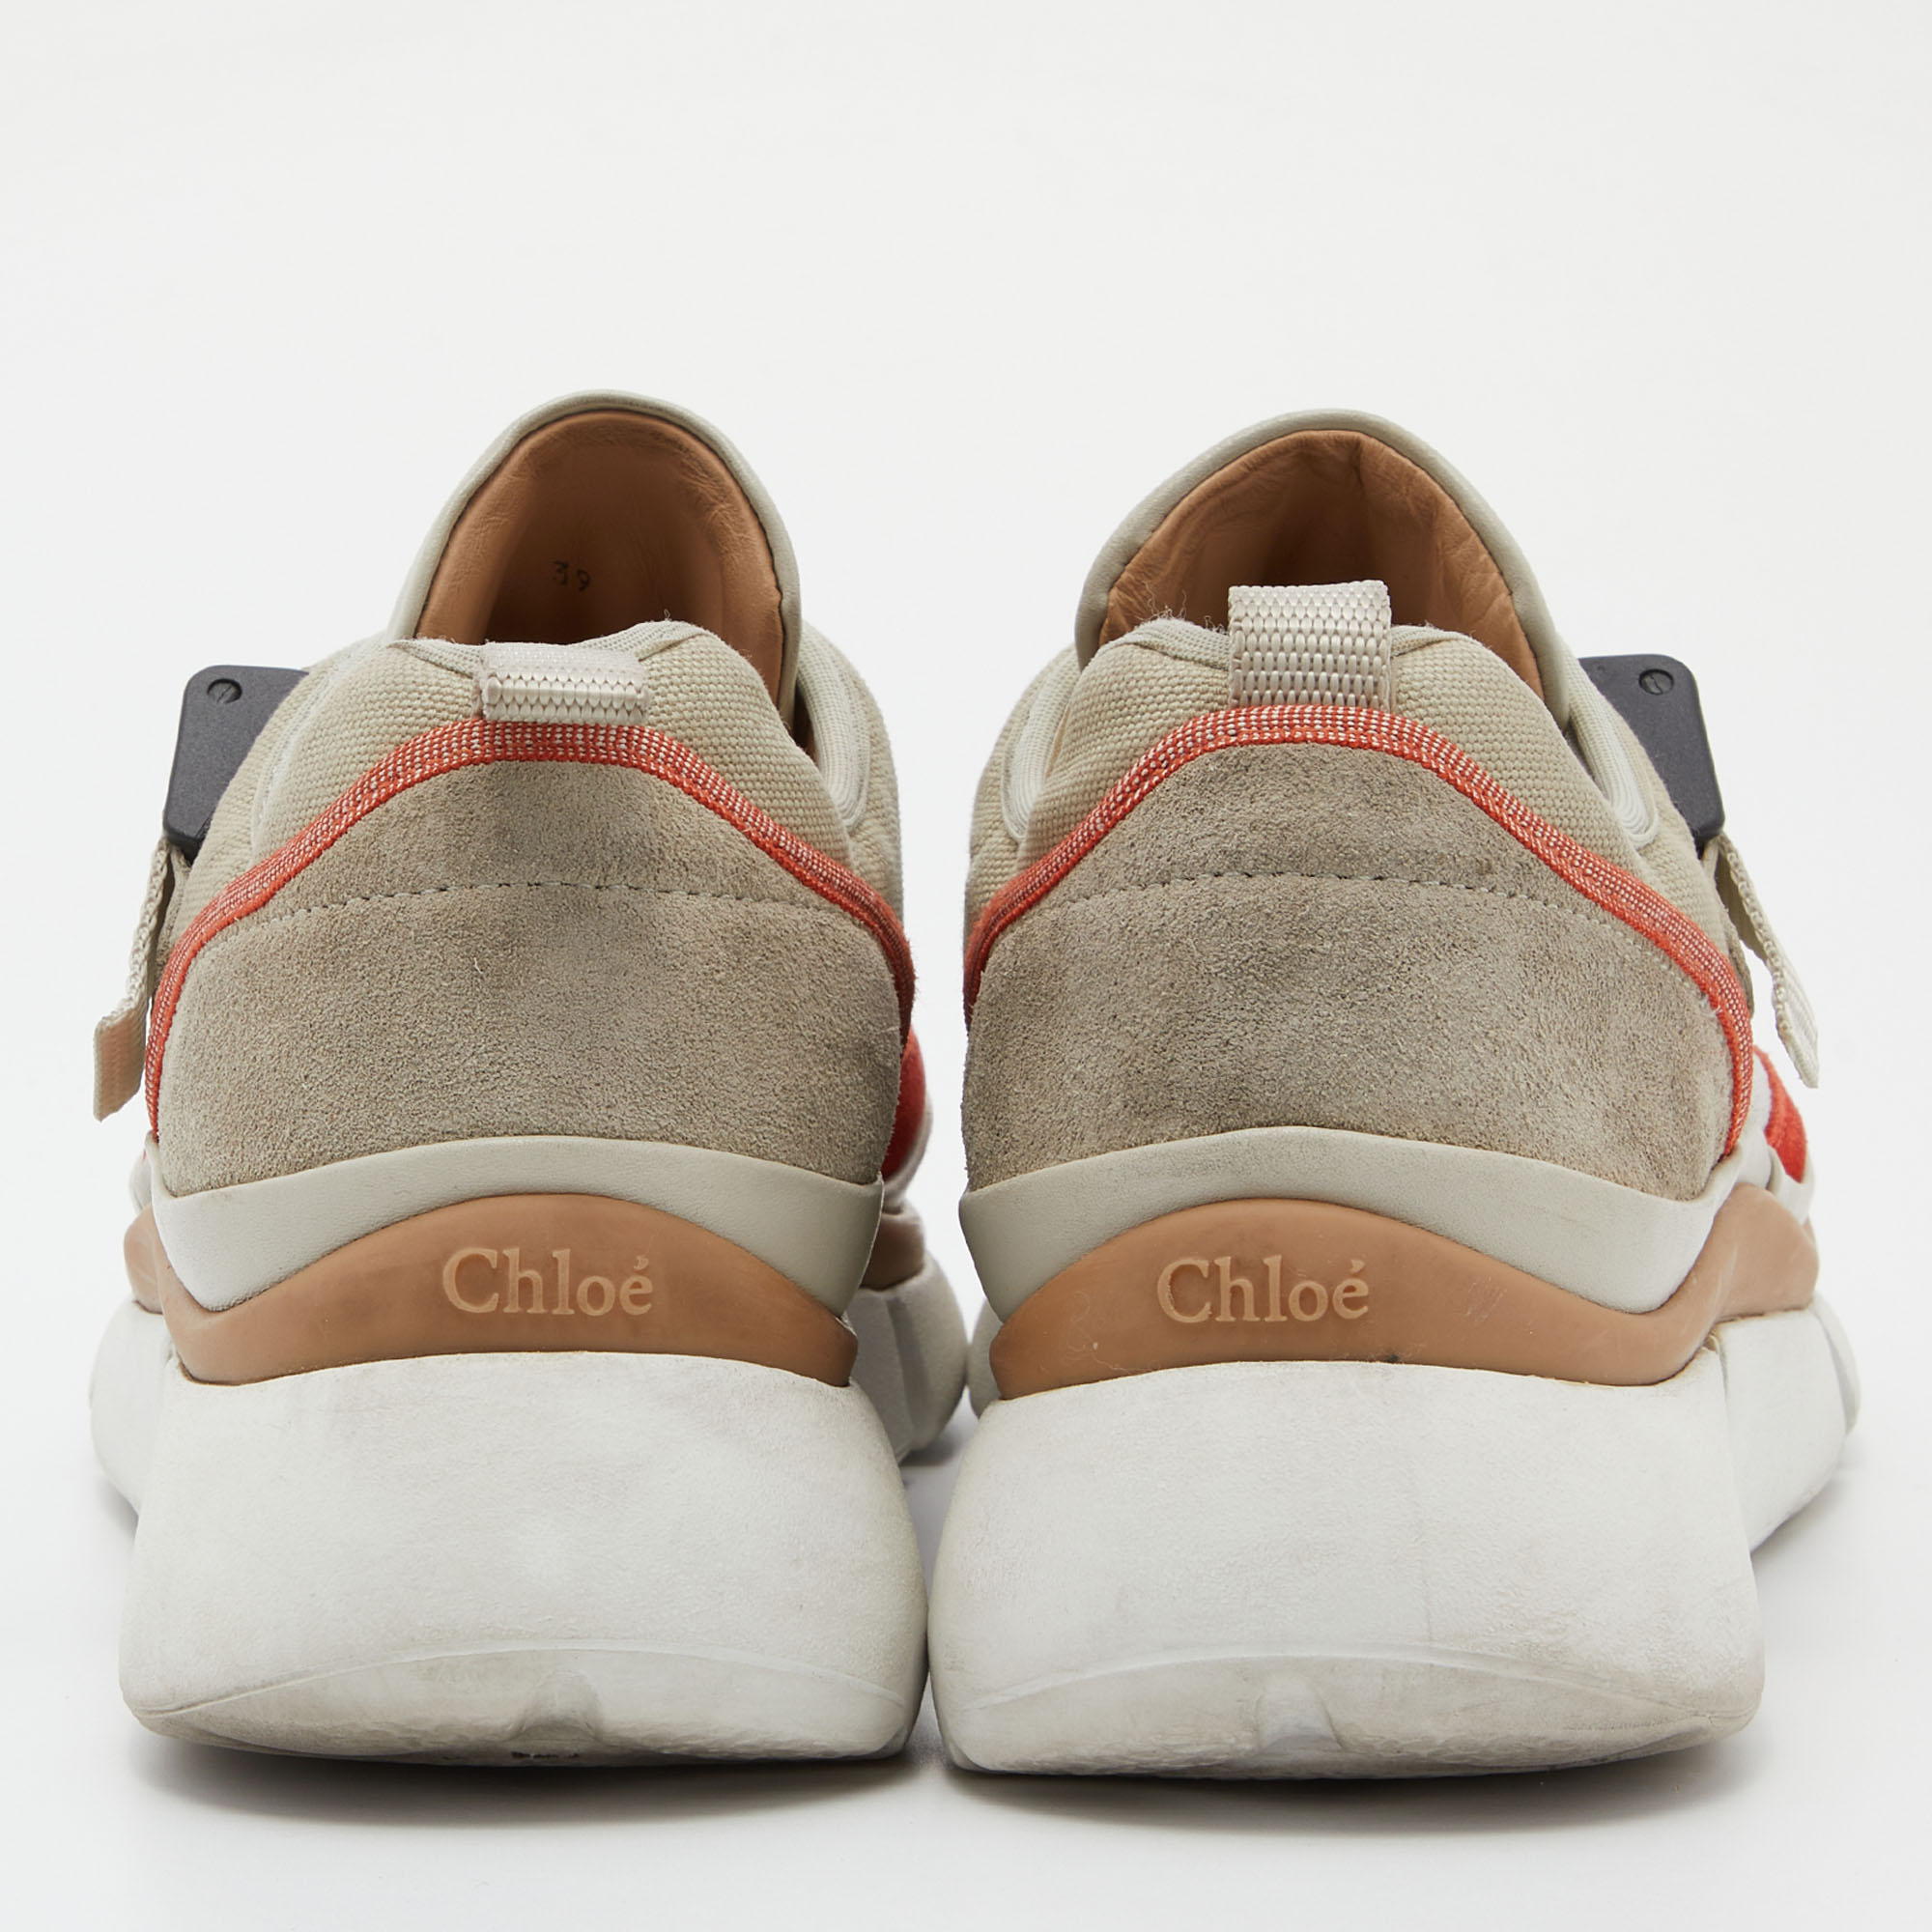 Chloe Tricolor Suede And Mesh Sonnie Sneakers Size 39